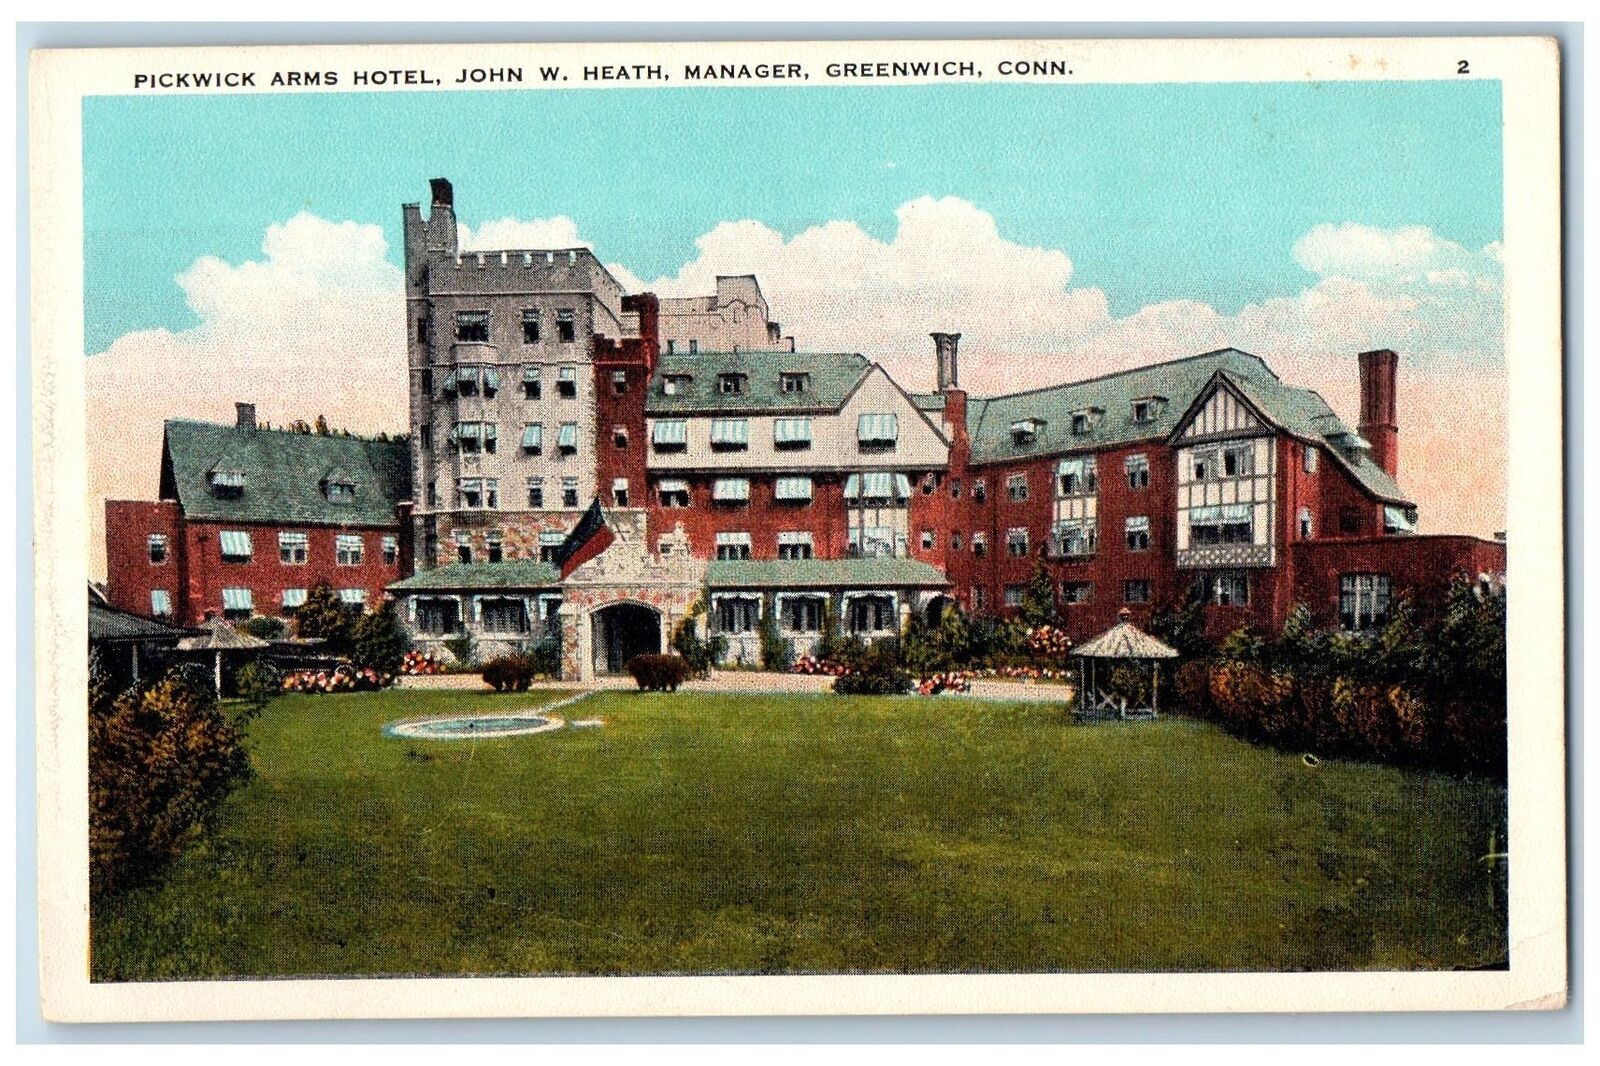 c1920's Pickwick Arms Hotel Front View Lawn Garden Greenwich Conn. CT Postcard